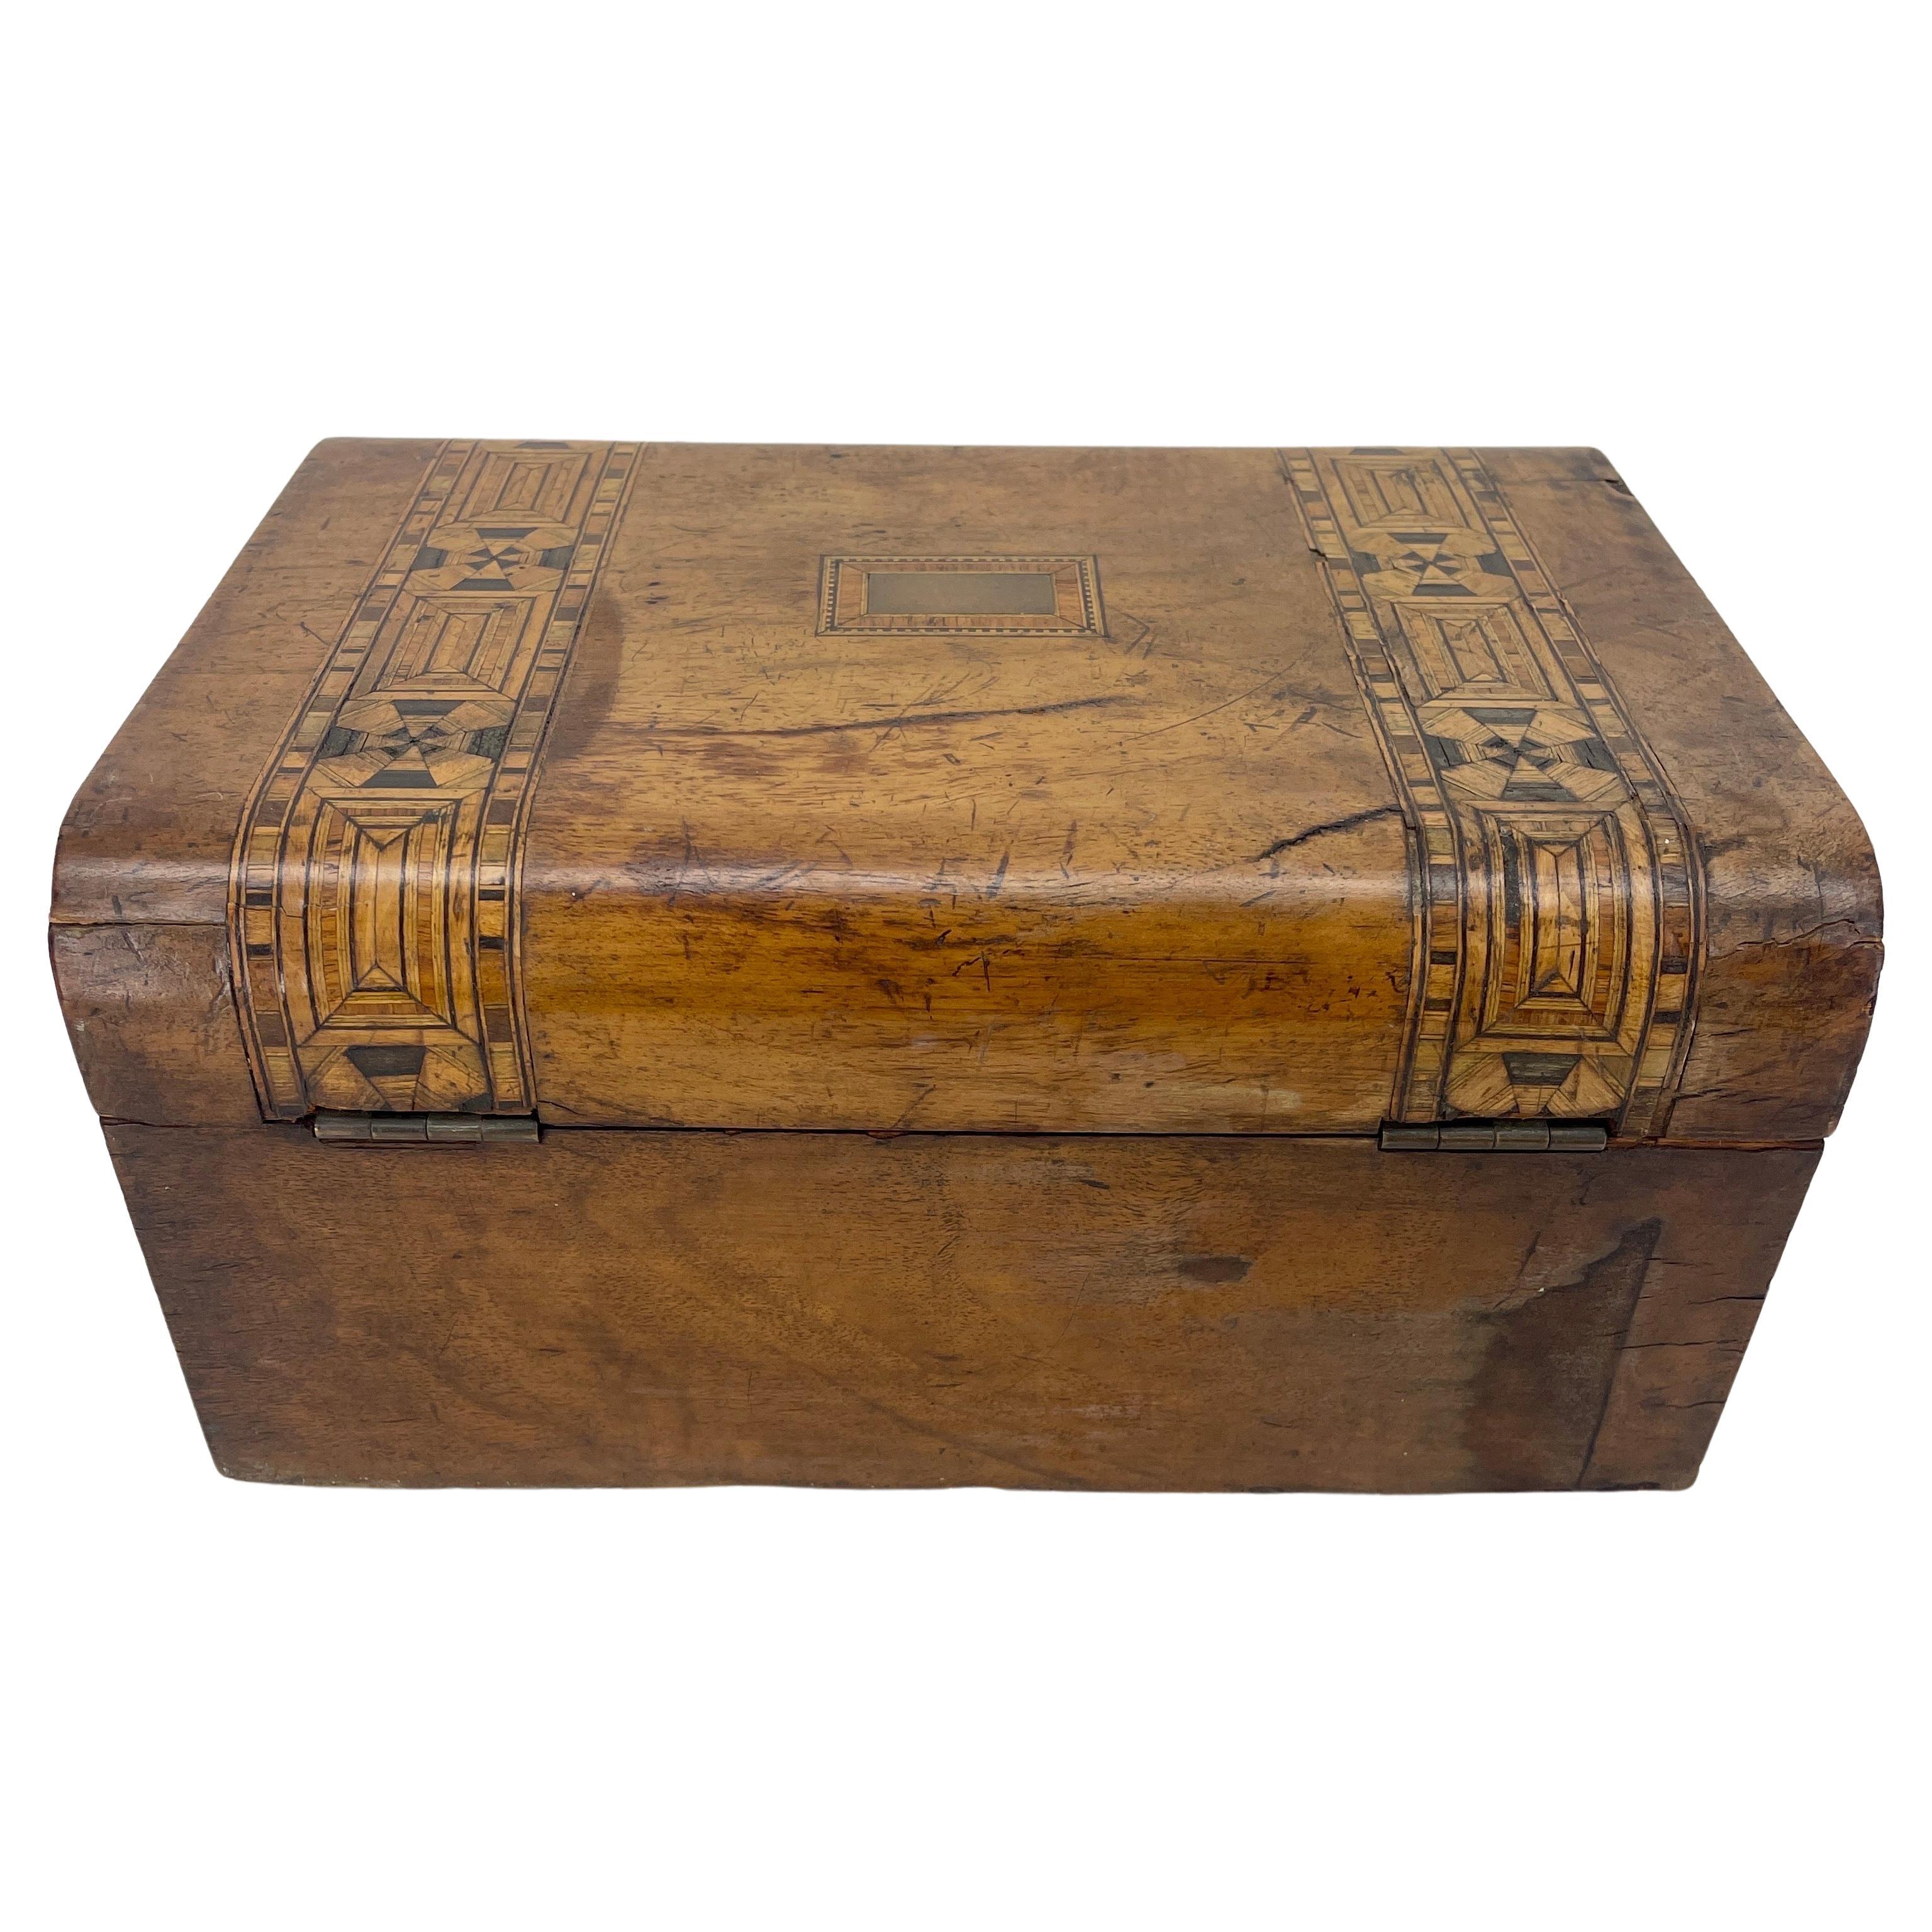 Wood Swedish Inlaid Fruitwood and Veneered Box with Curved Top Early 19th Century For Sale